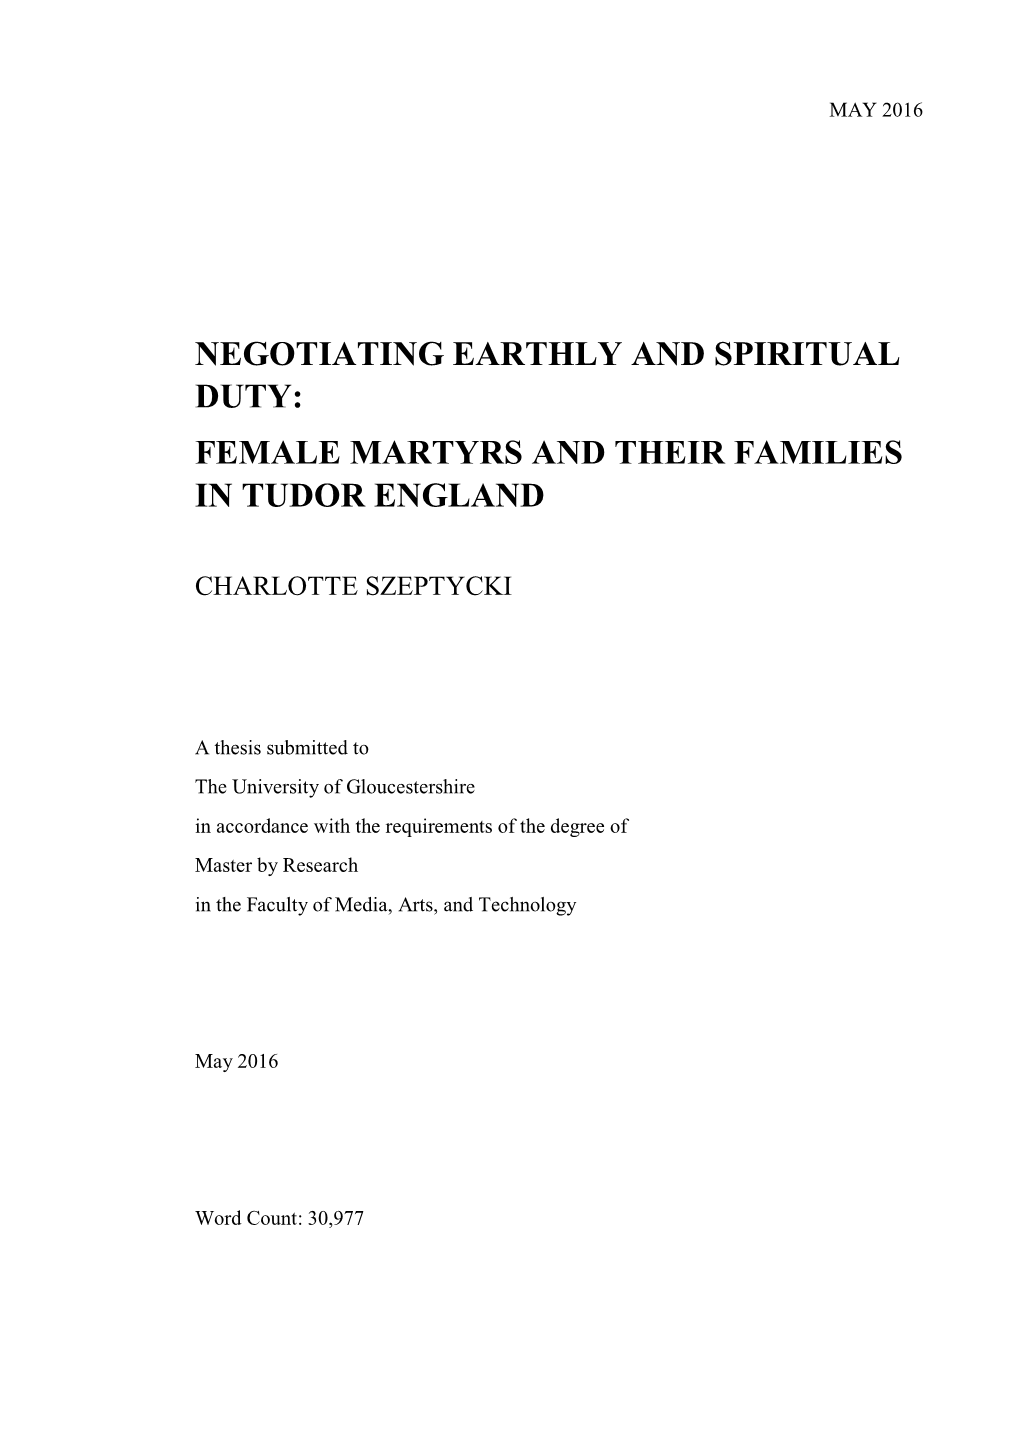 Negotiating Earthly and Spiritual Duty: Female Martyrs and Their Families in Tudor England